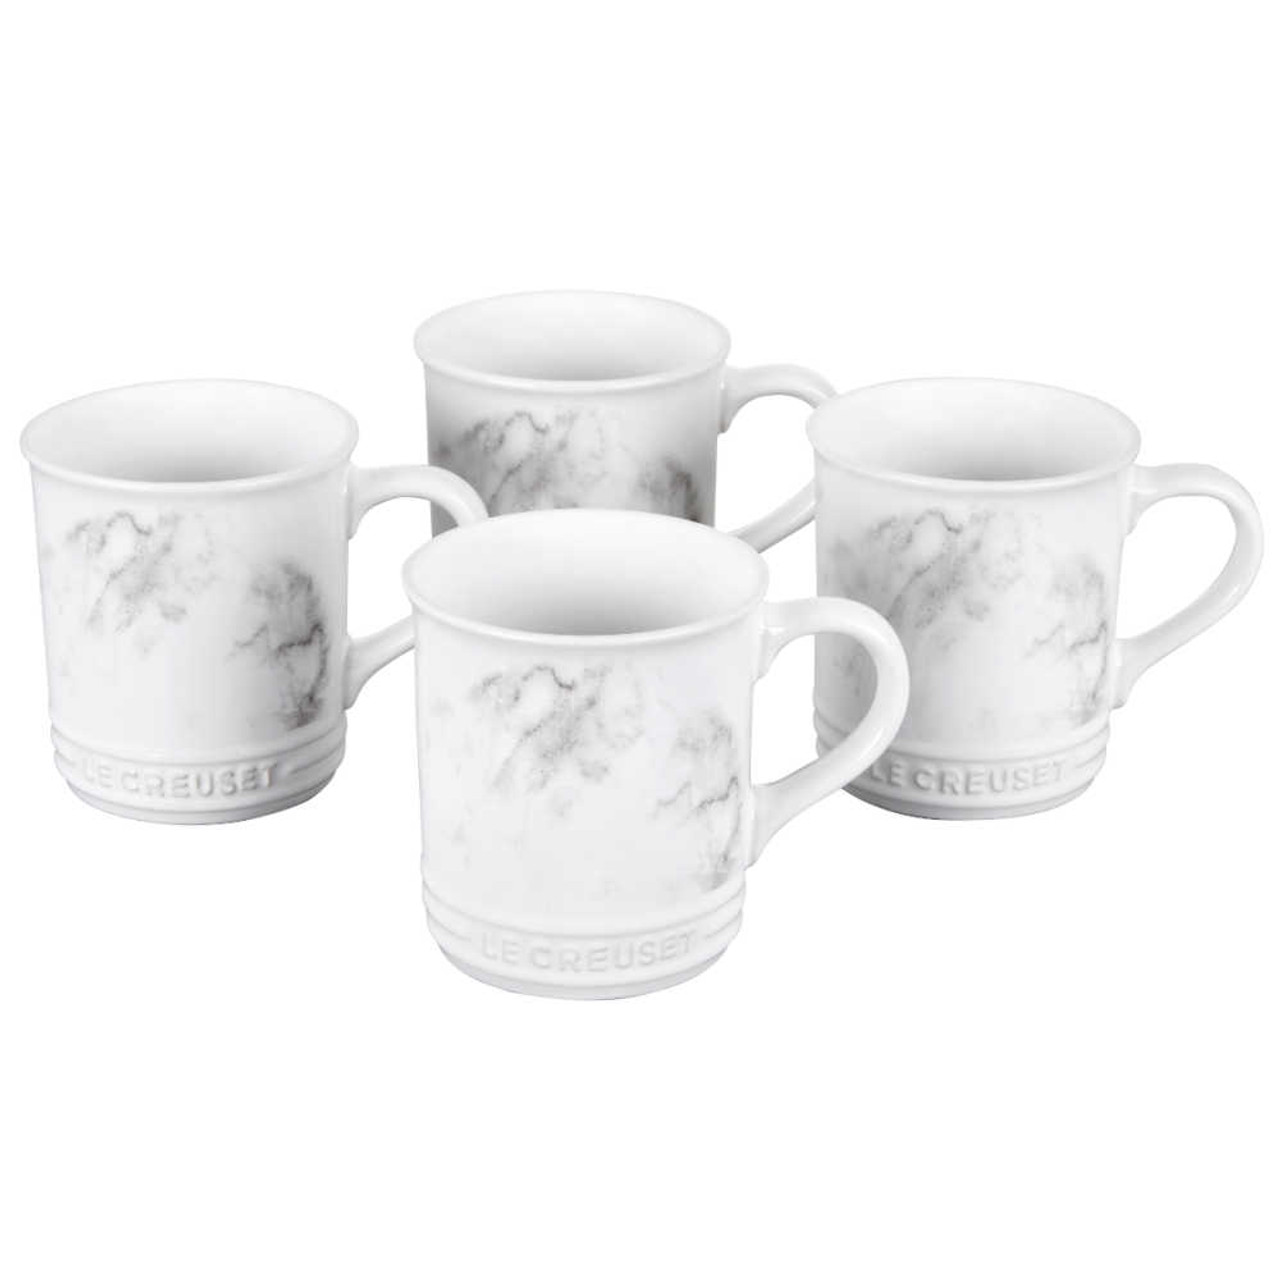 https://cdn11.bigcommerce.com/s-hccytny0od/images/stencil/1280x1280/products/5492/23916/Le_Creuset_Marble_Collection_Mugs__10178.1685133035.jpg?c=2?imbypass=on